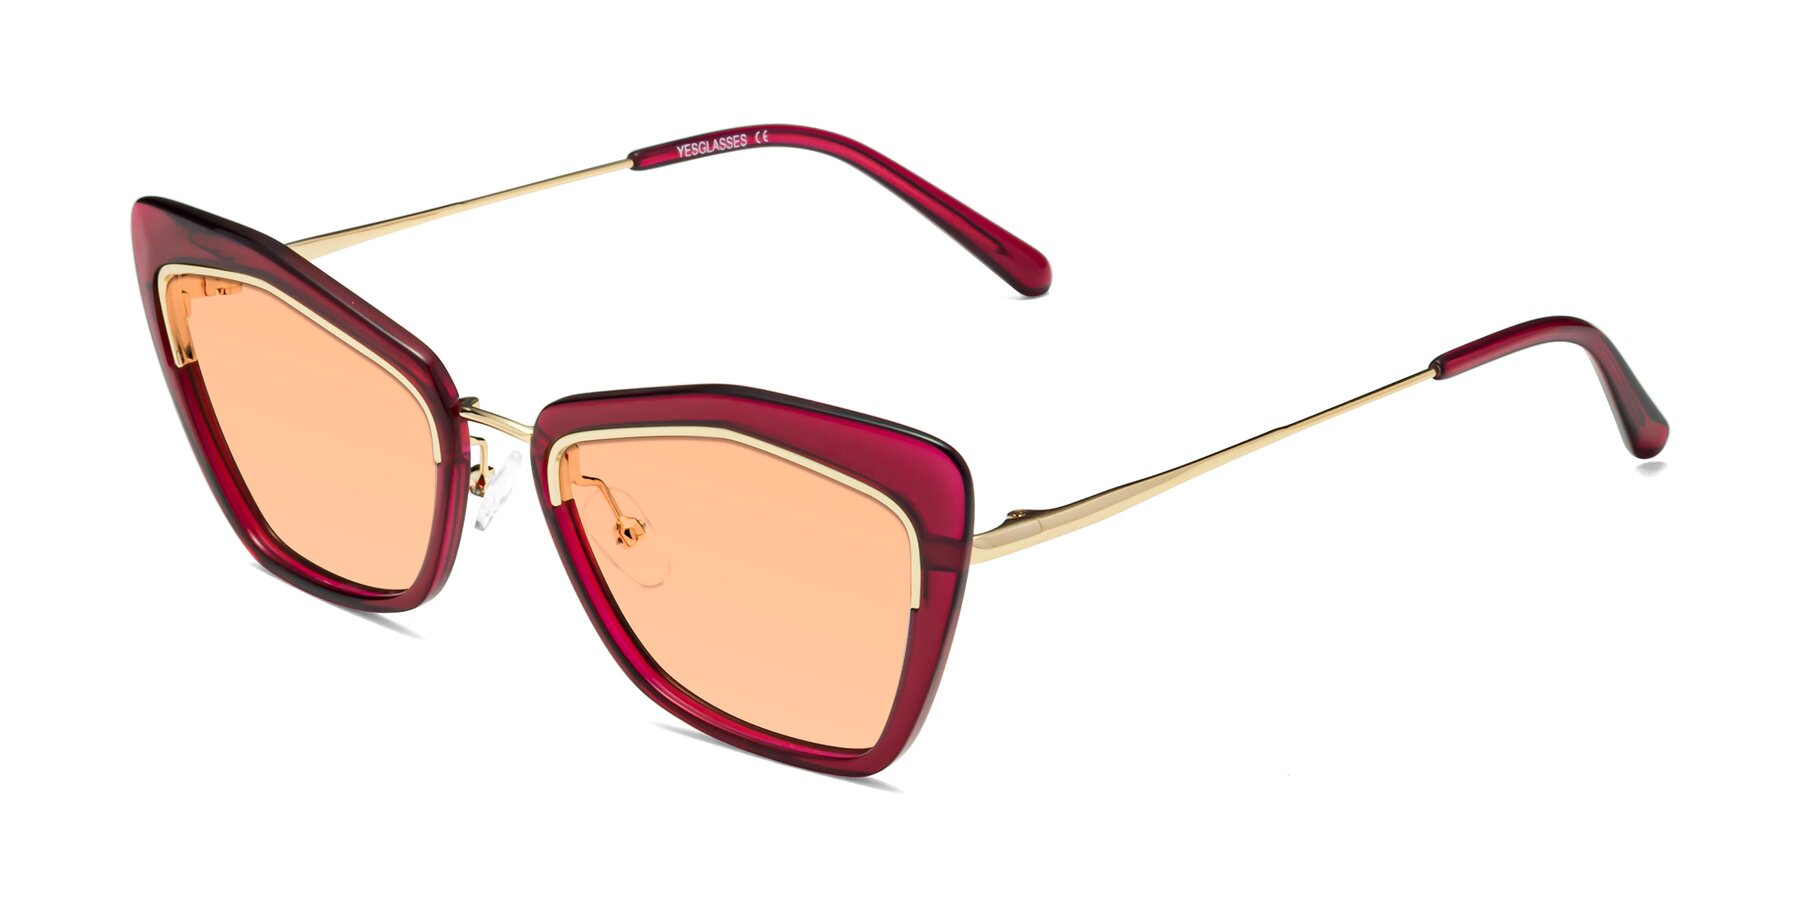 Angle of Lasso in Wine with Light Orange Tinted Lenses